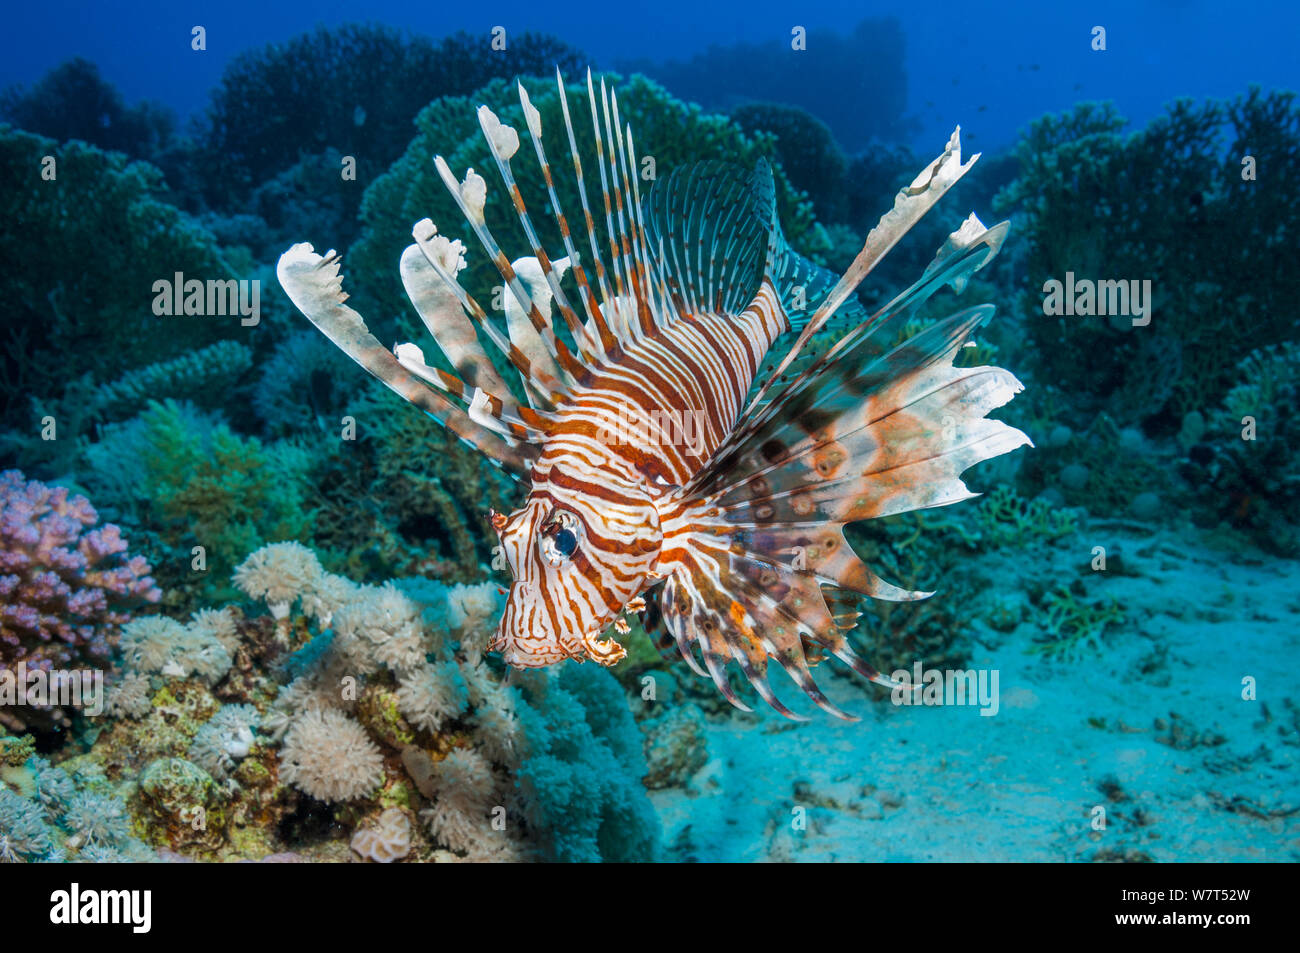 Common lionfish / Devil firefish (Pterois miles)  Egypt, Red Sea, endemic species. Stock Photo